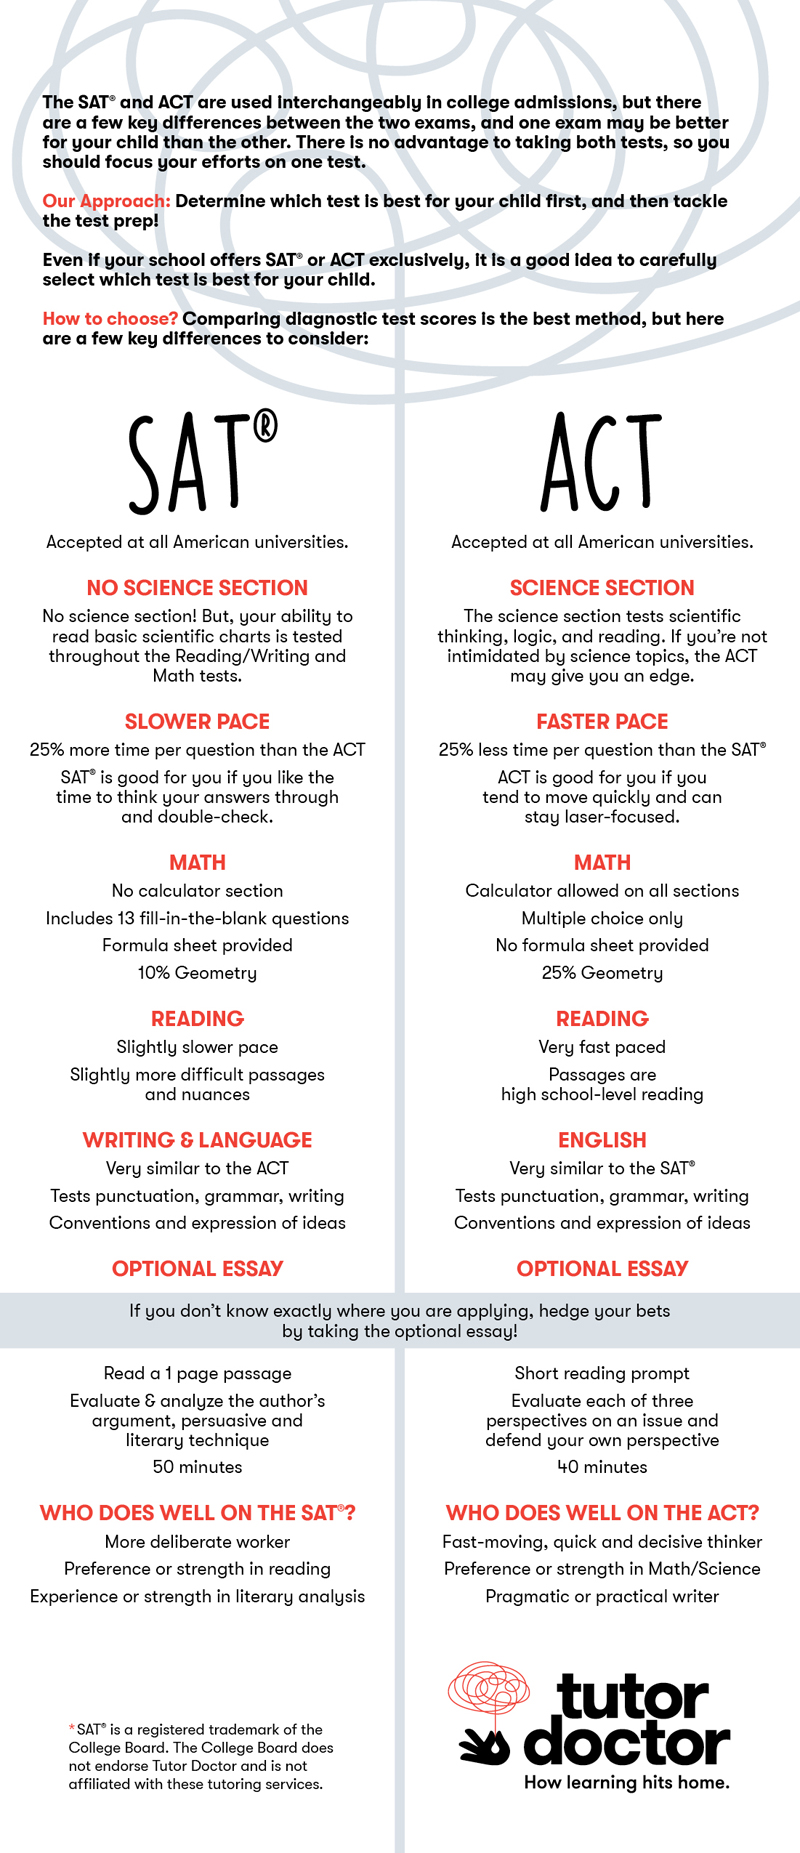 Do I Take The SAT or ACT? infographic from Tutor Doctor